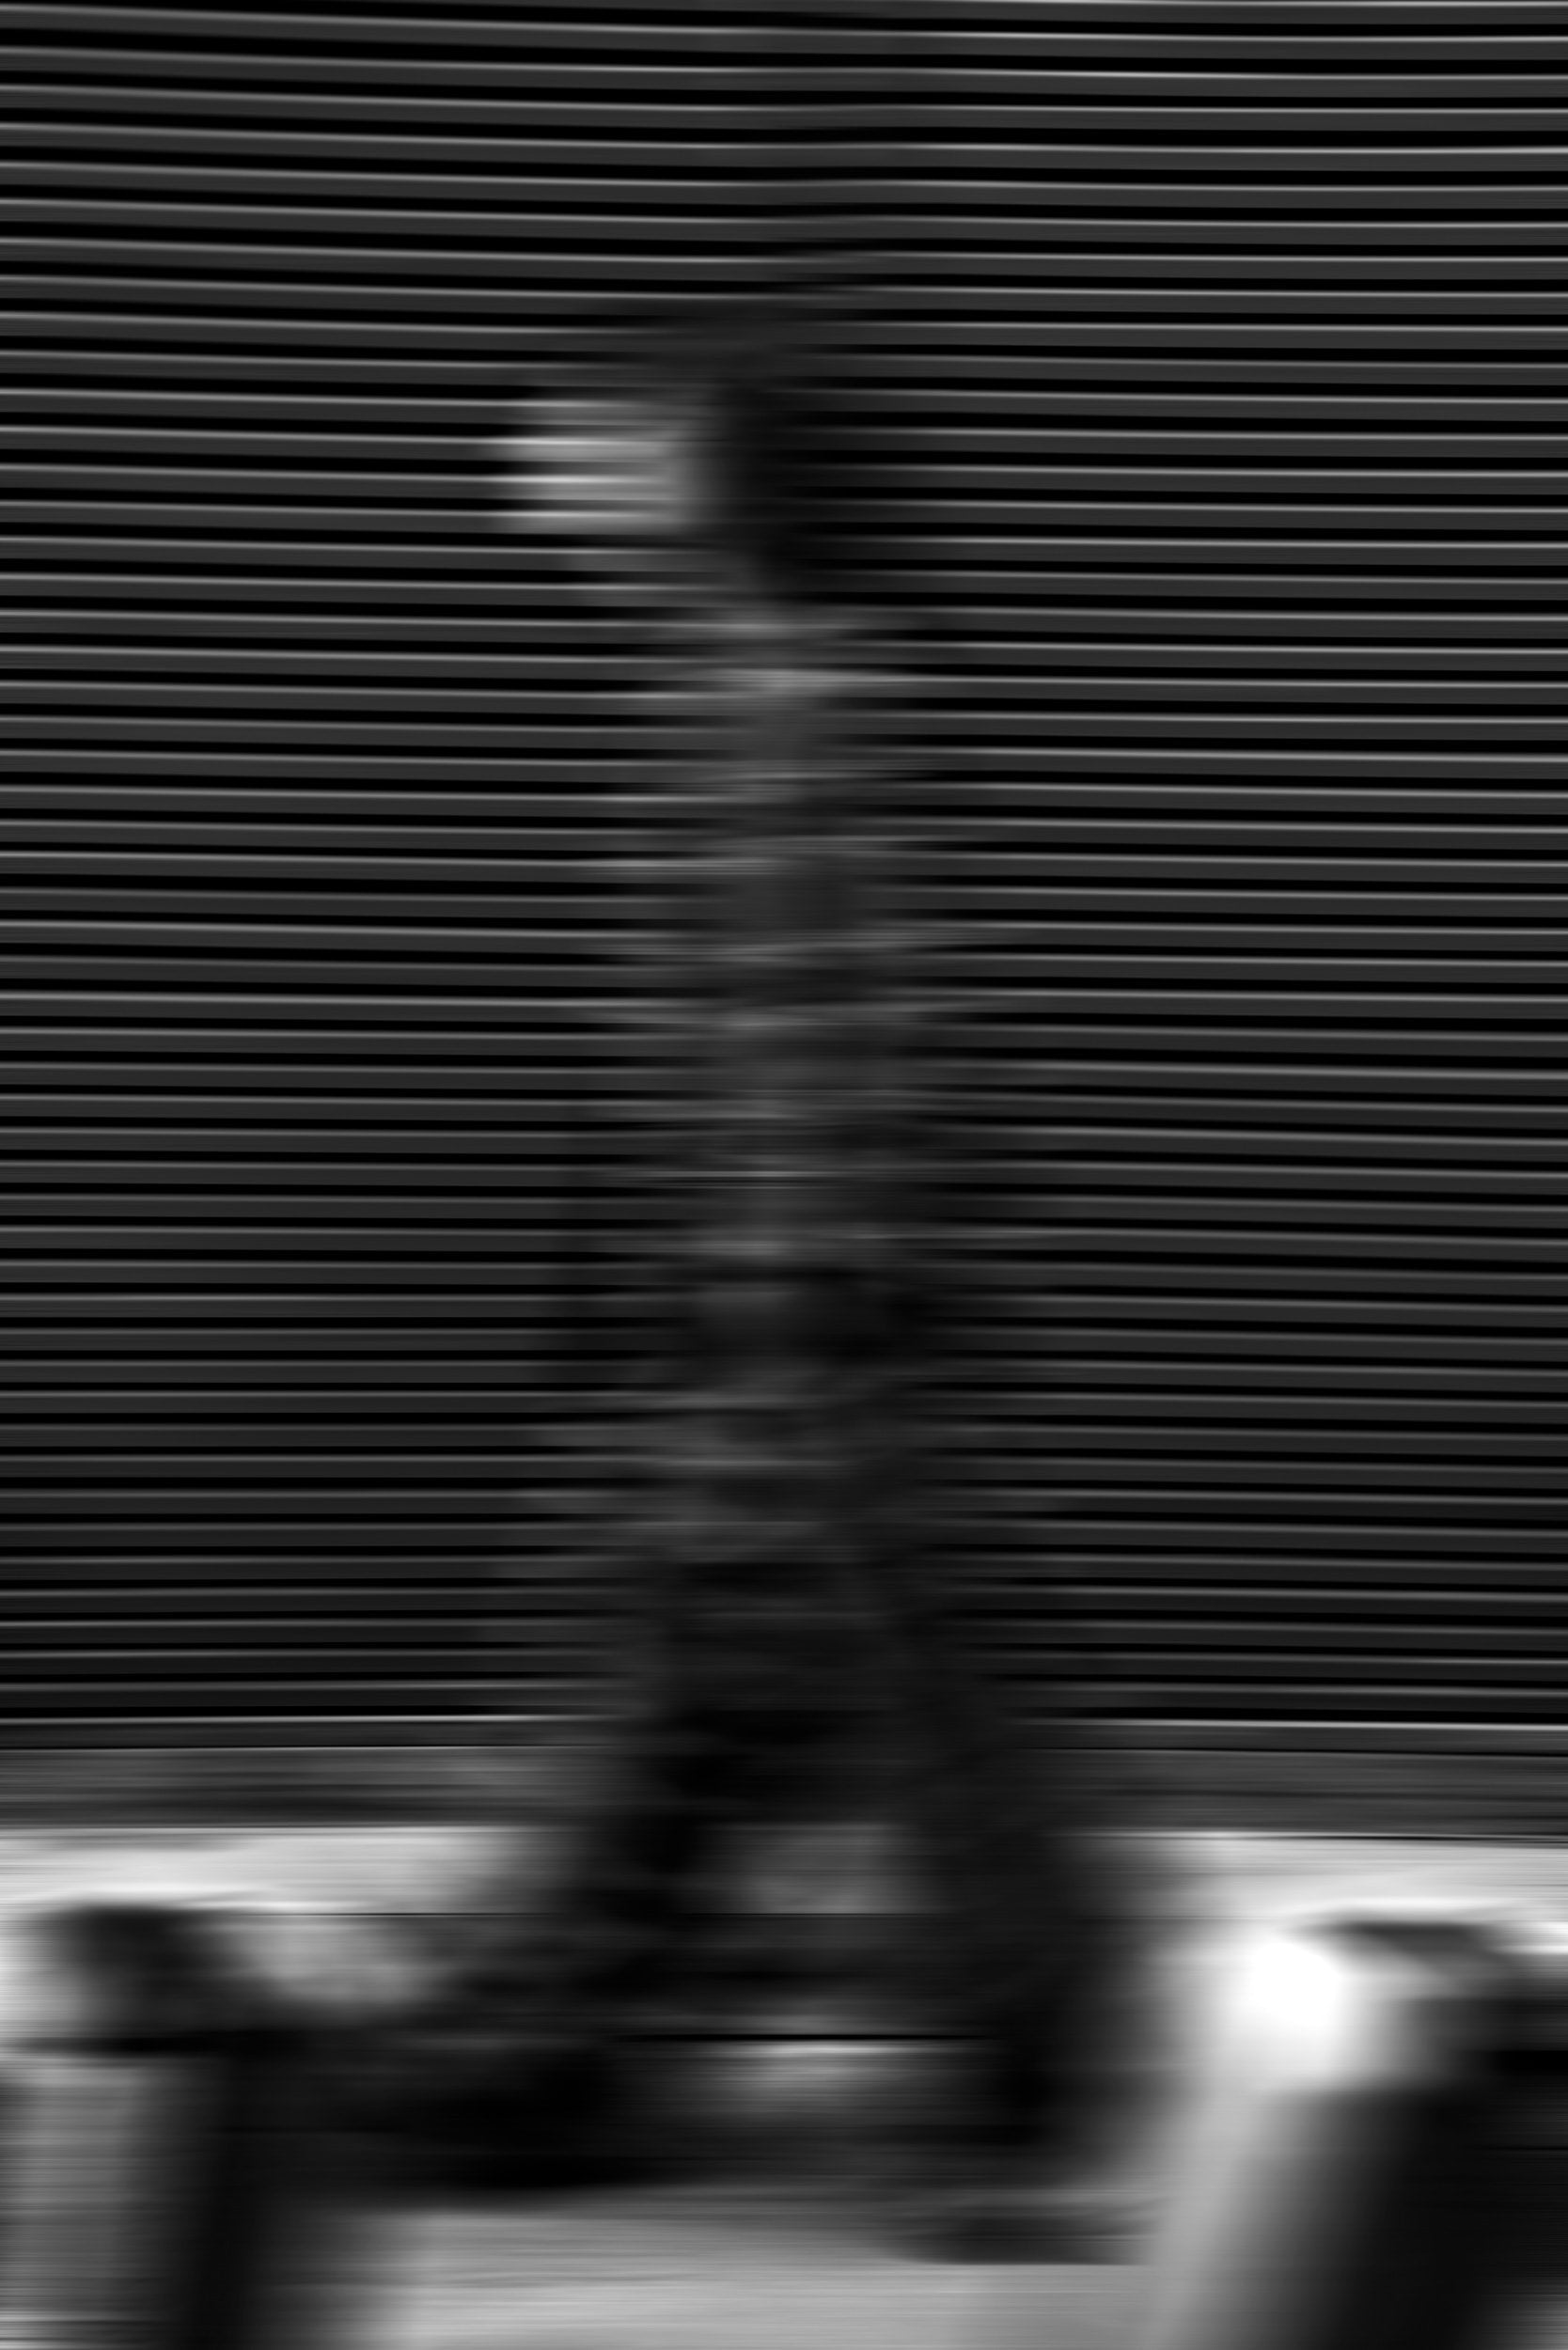 The artpiece 'Passenger' by Mathieu Puga shows a faded person walking in front of a patterned wall, with horizontal stripes visible through the blurry person. Creating an image seemingly full of motion.